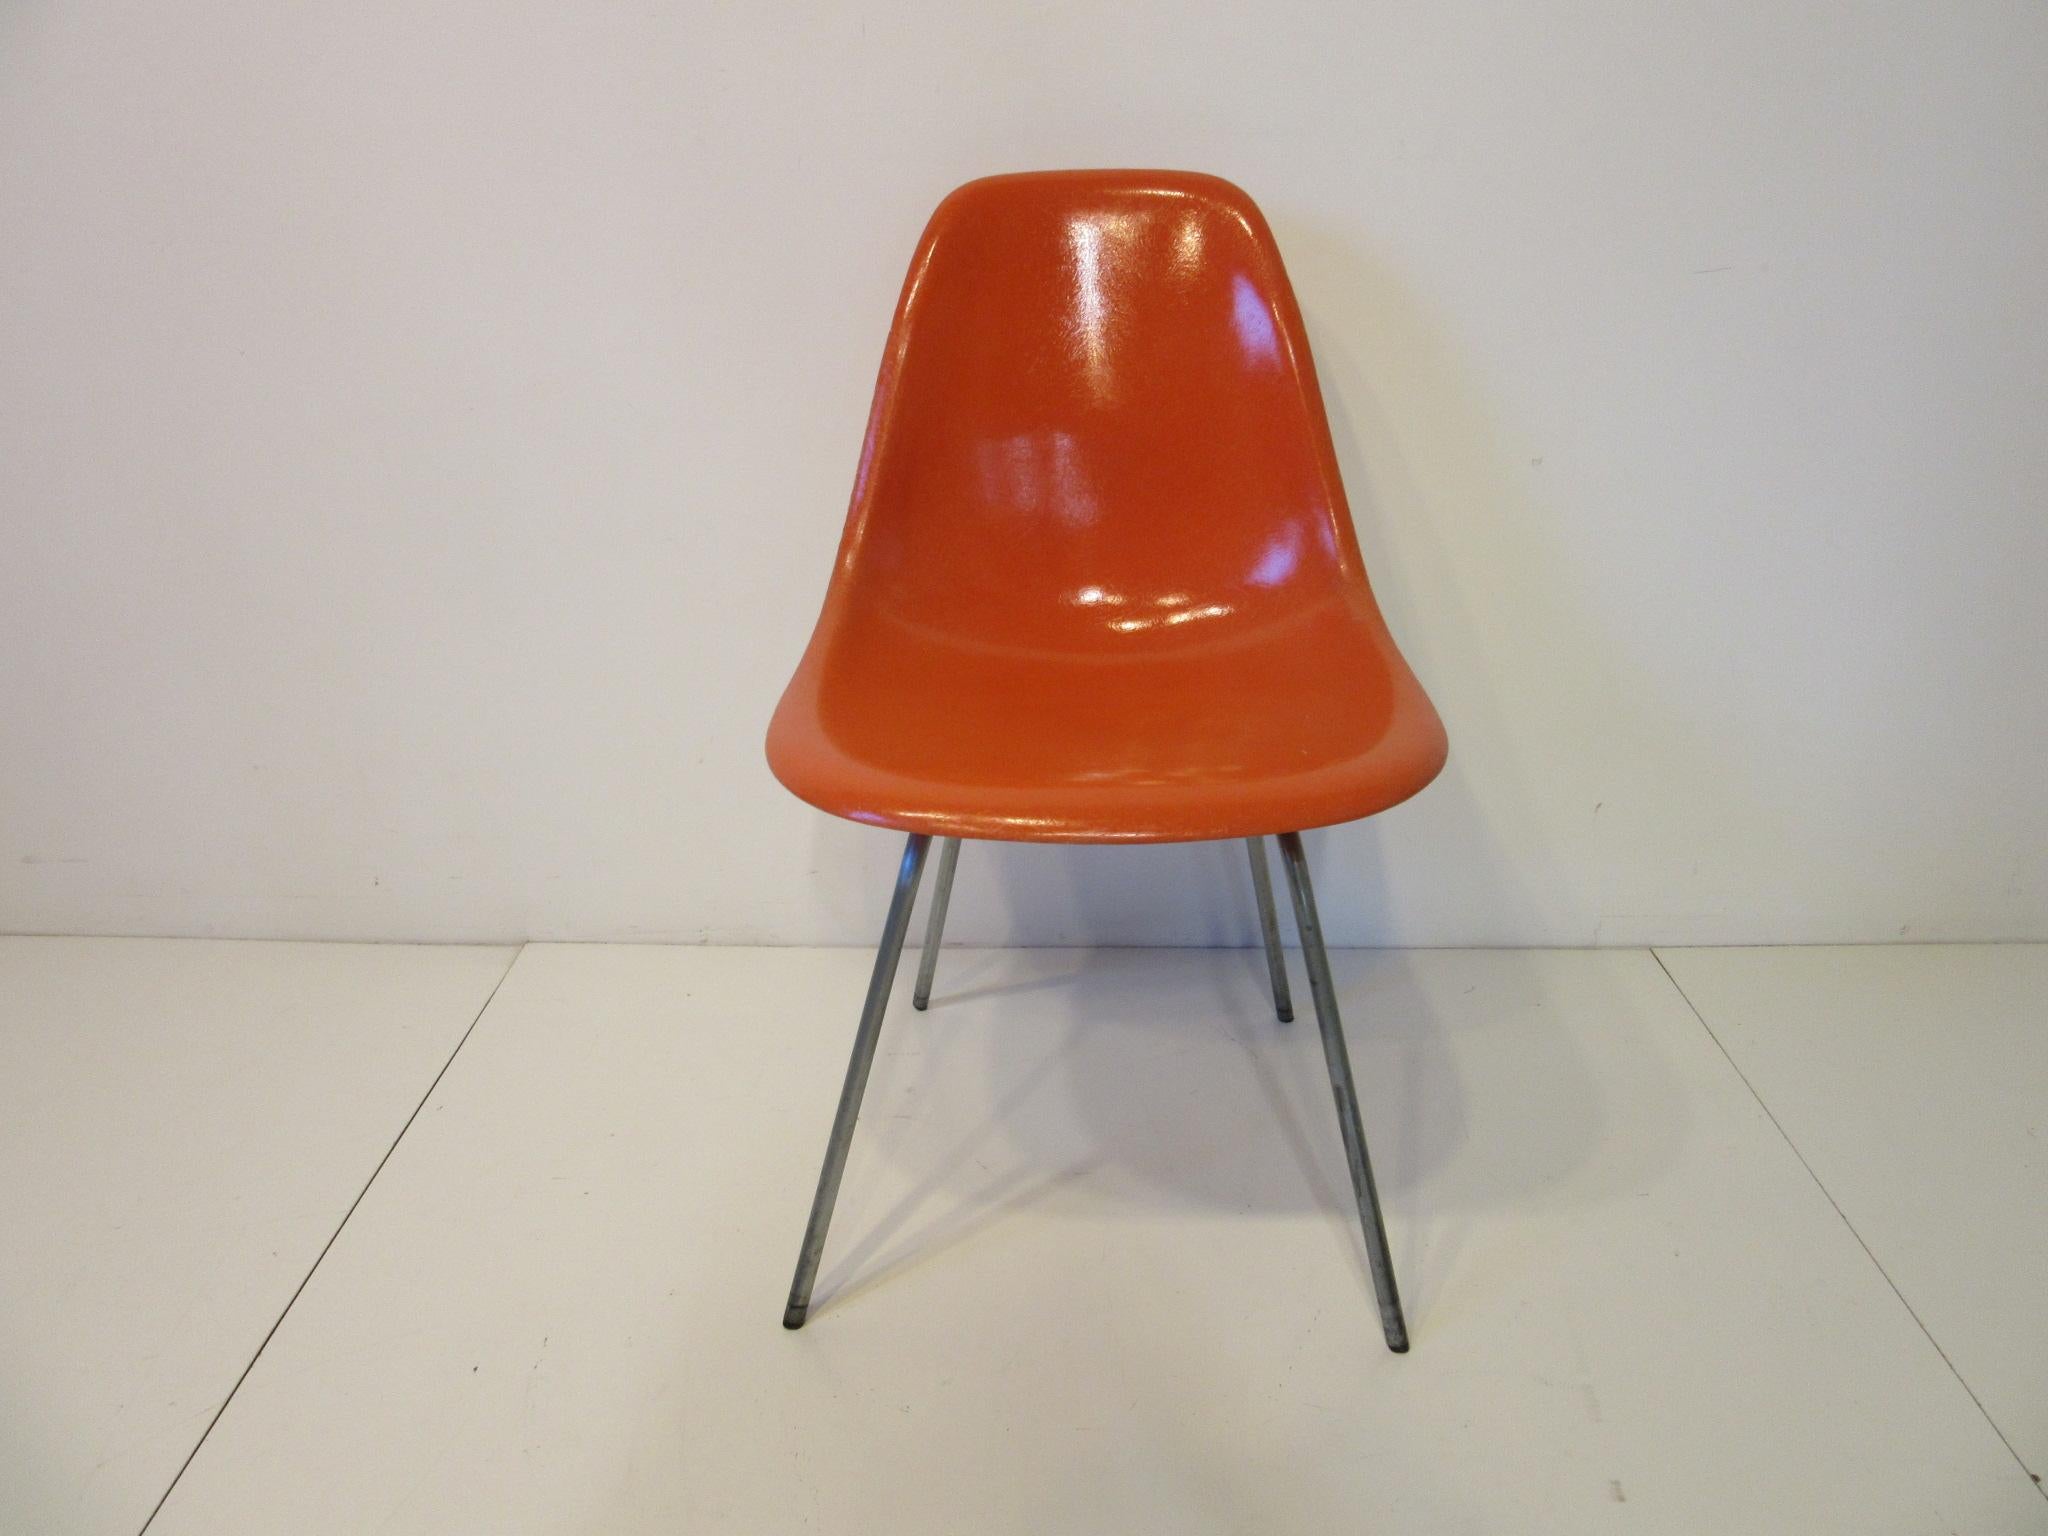 A set of four matching early orange fiberglass side chairs with zinc coated metal H bases and smaller black plastic tipped foot pads. Retains the paper manufactures label by the Herman Miller Furniture company Zeeland, Michigan.